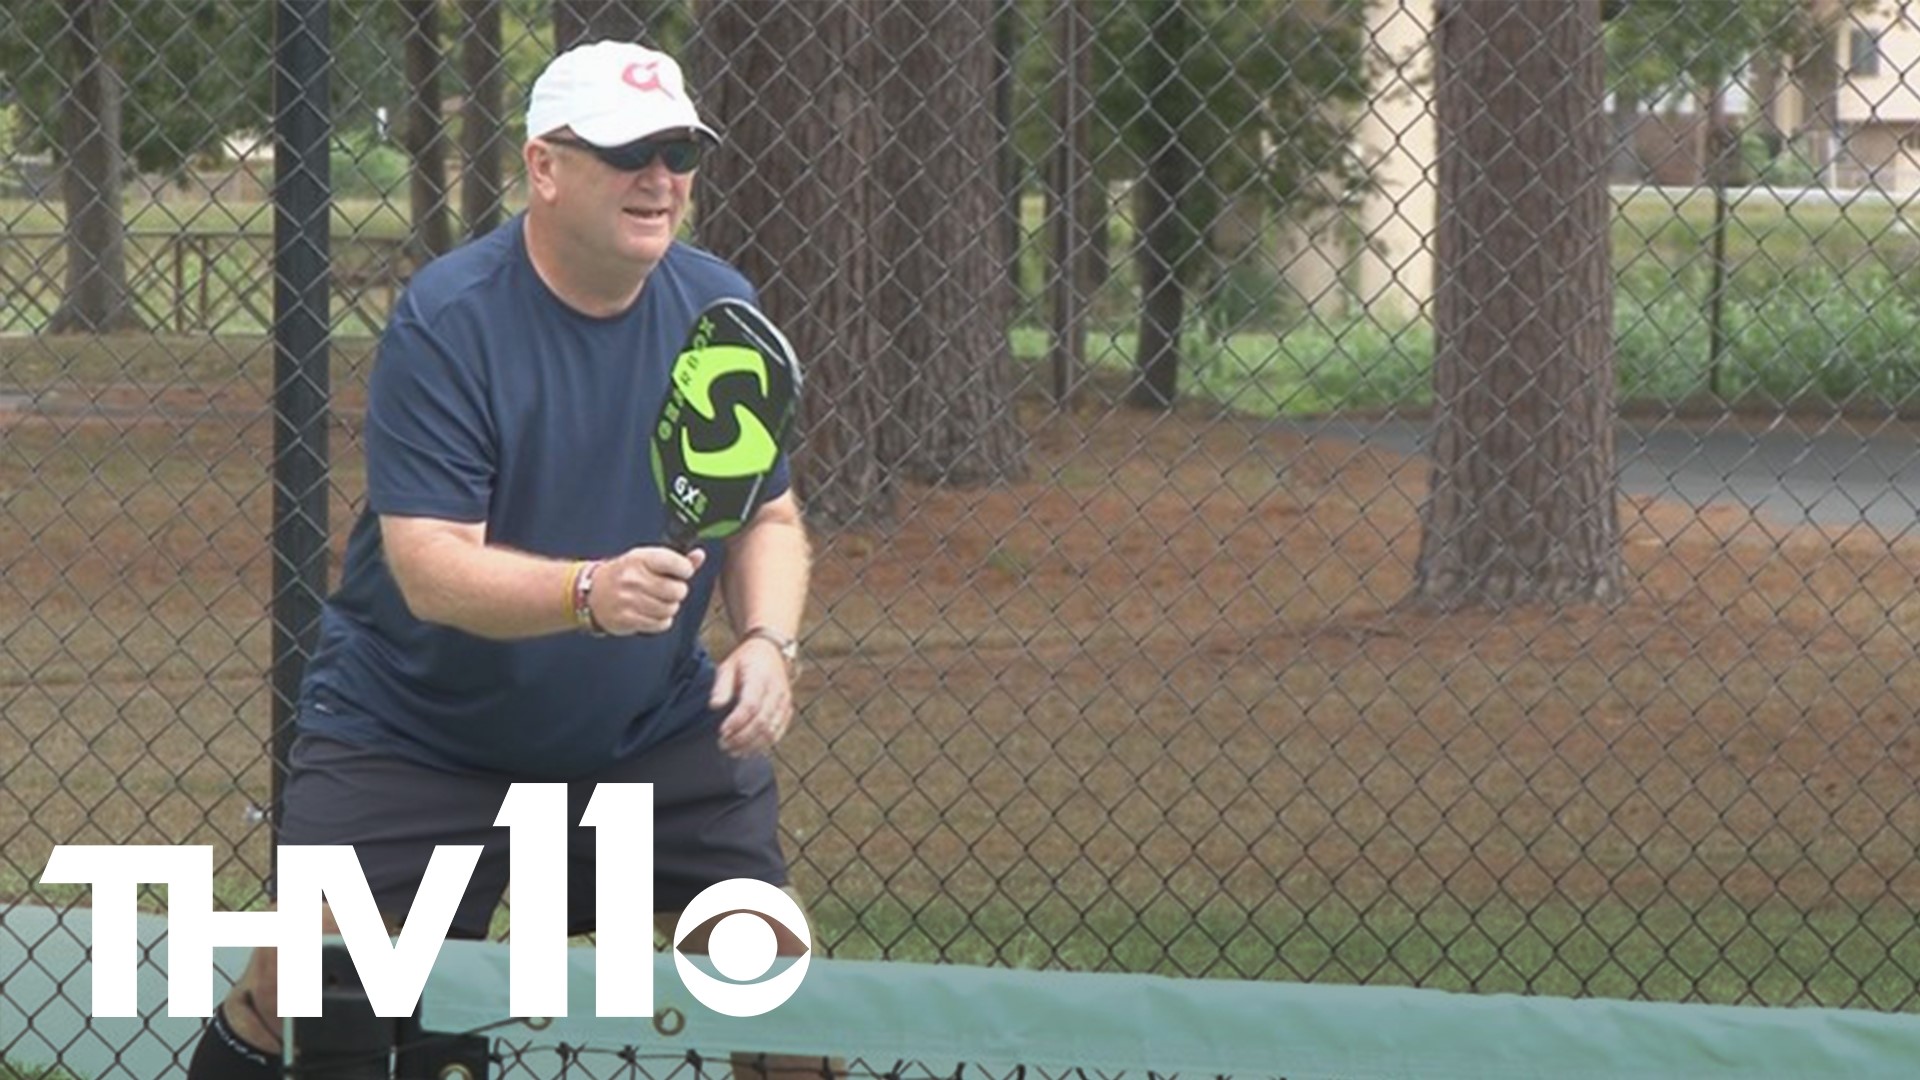 Do you know what pickleball is? It's a mix of tennis and badminton with a wiffle ball. And it's becoming more popular.